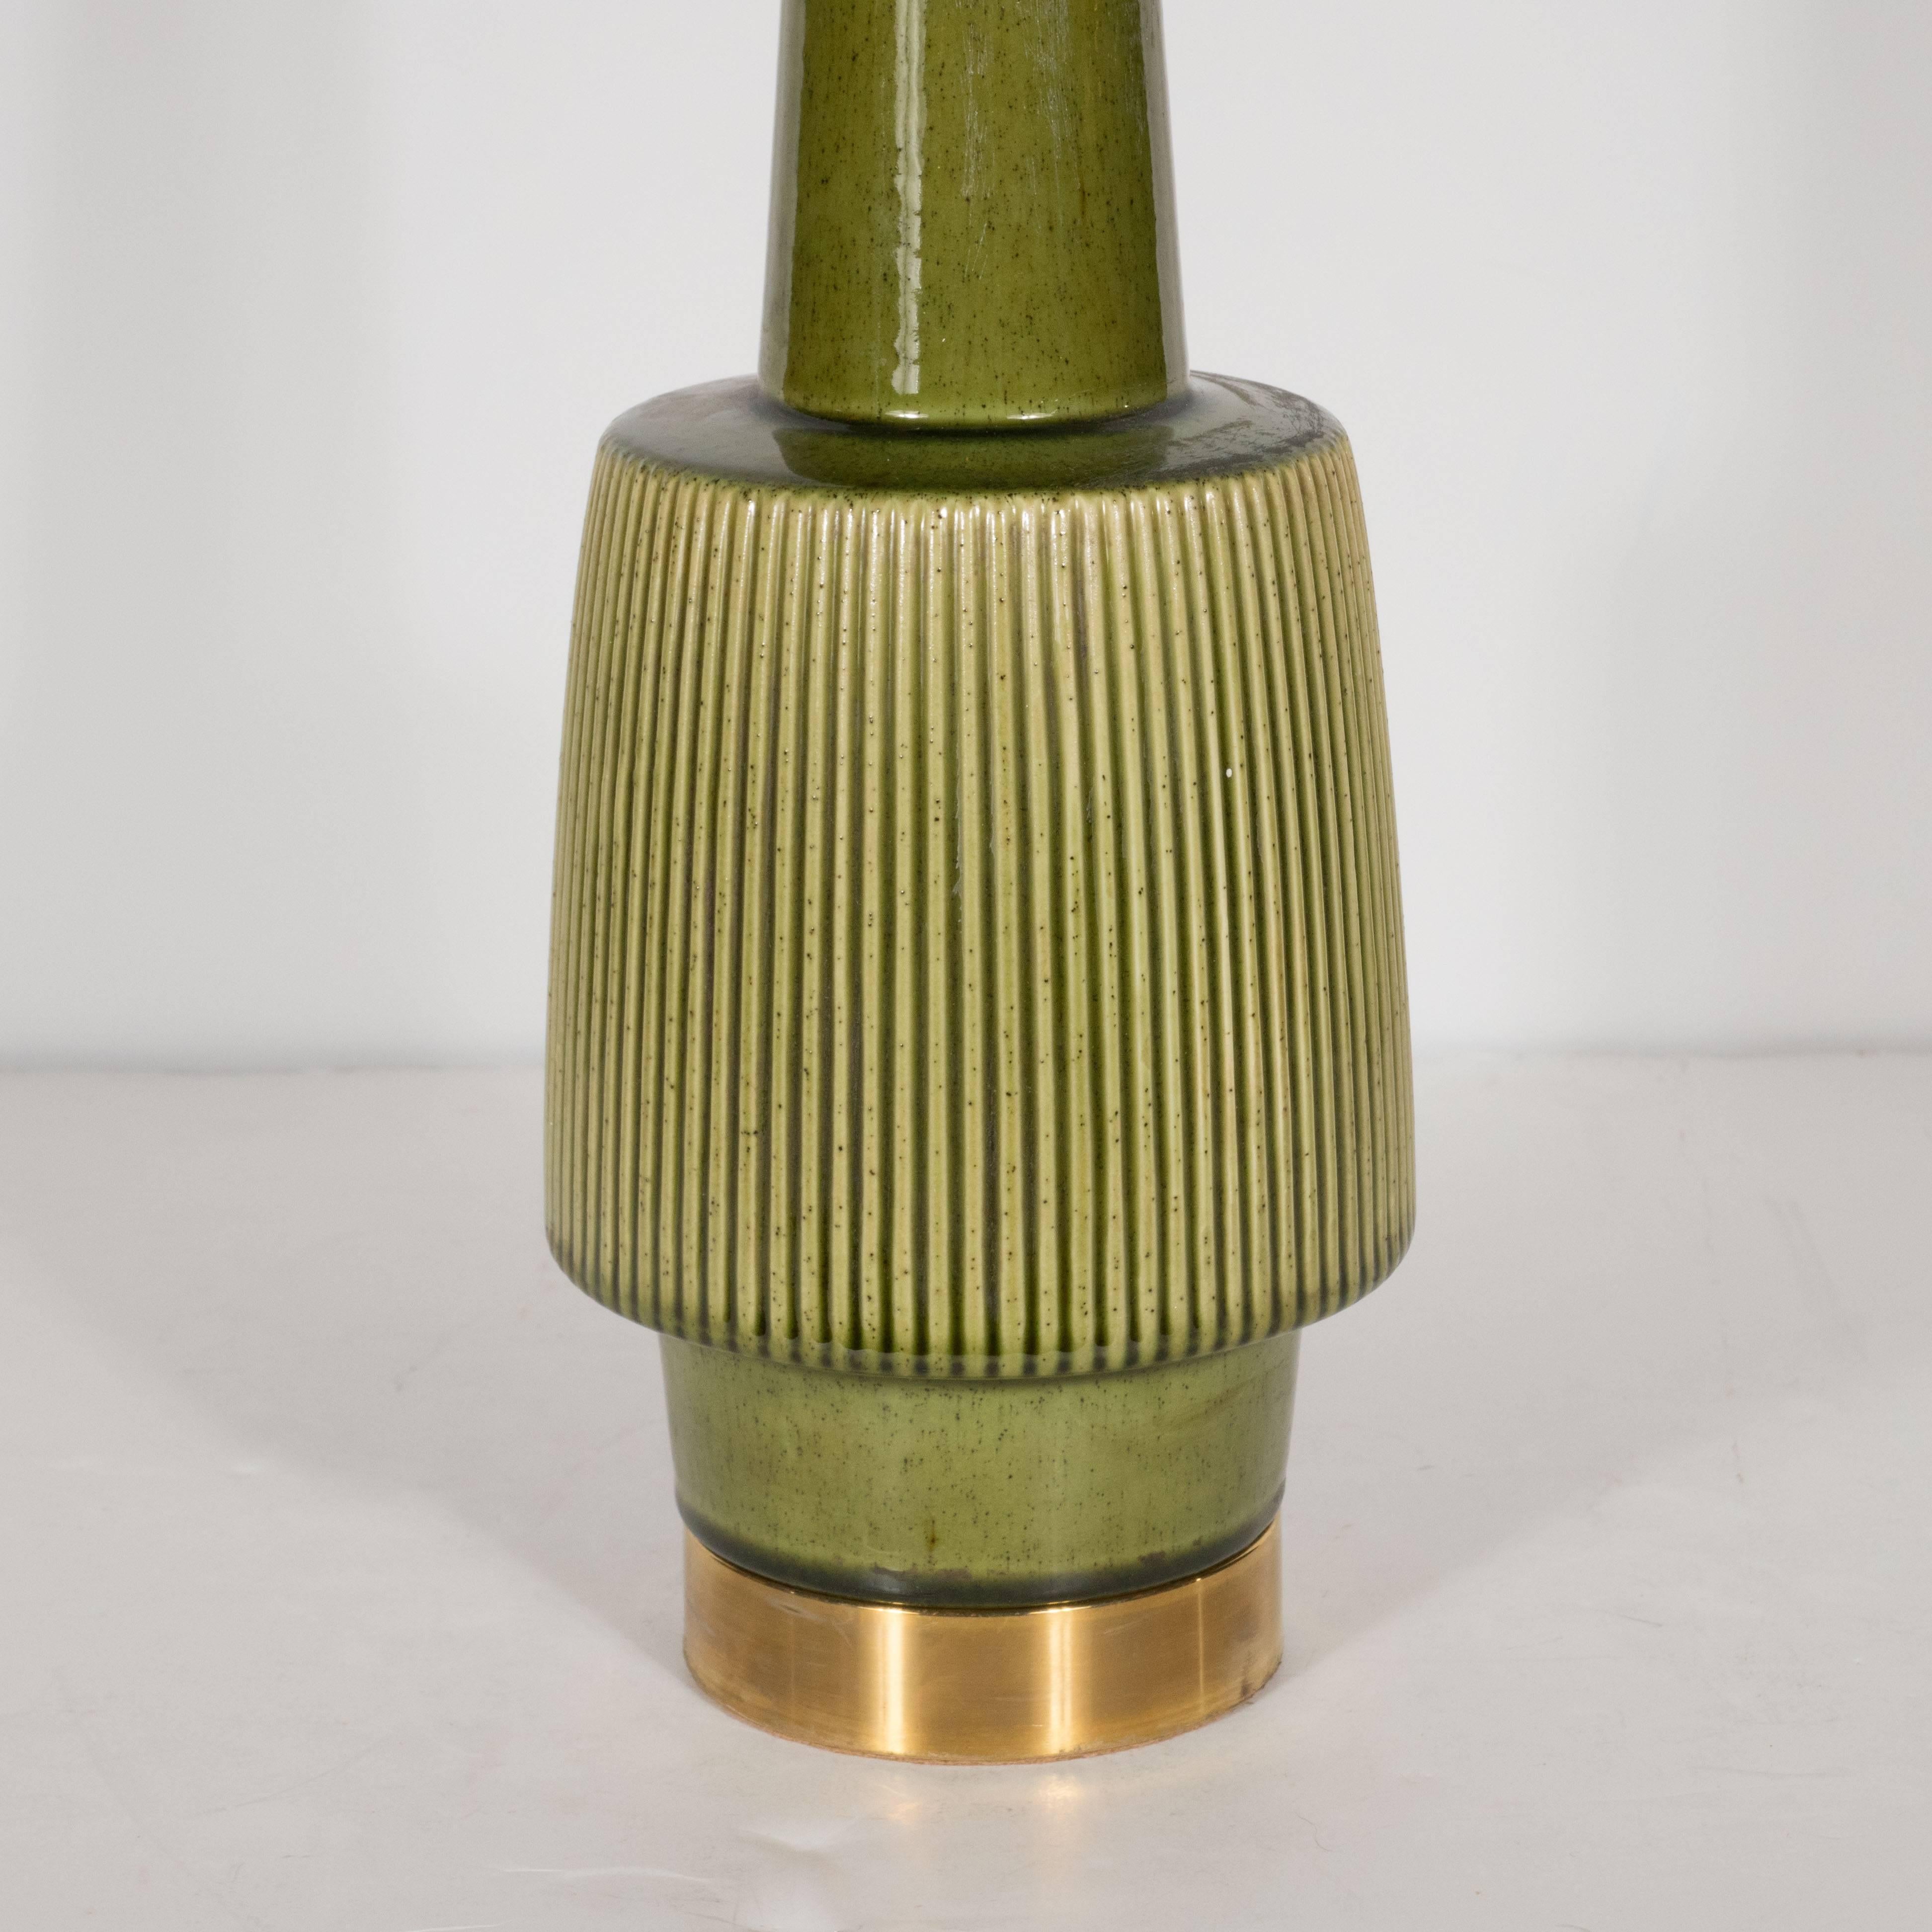 This pair of Mid-Century Modern table lamps were handcrafted in ceramic and glazed in a finely speckled green olive hue. The lamp rests on a brass base which ascends into a cylindrical form on which a larger striated form of the same shape sits. A